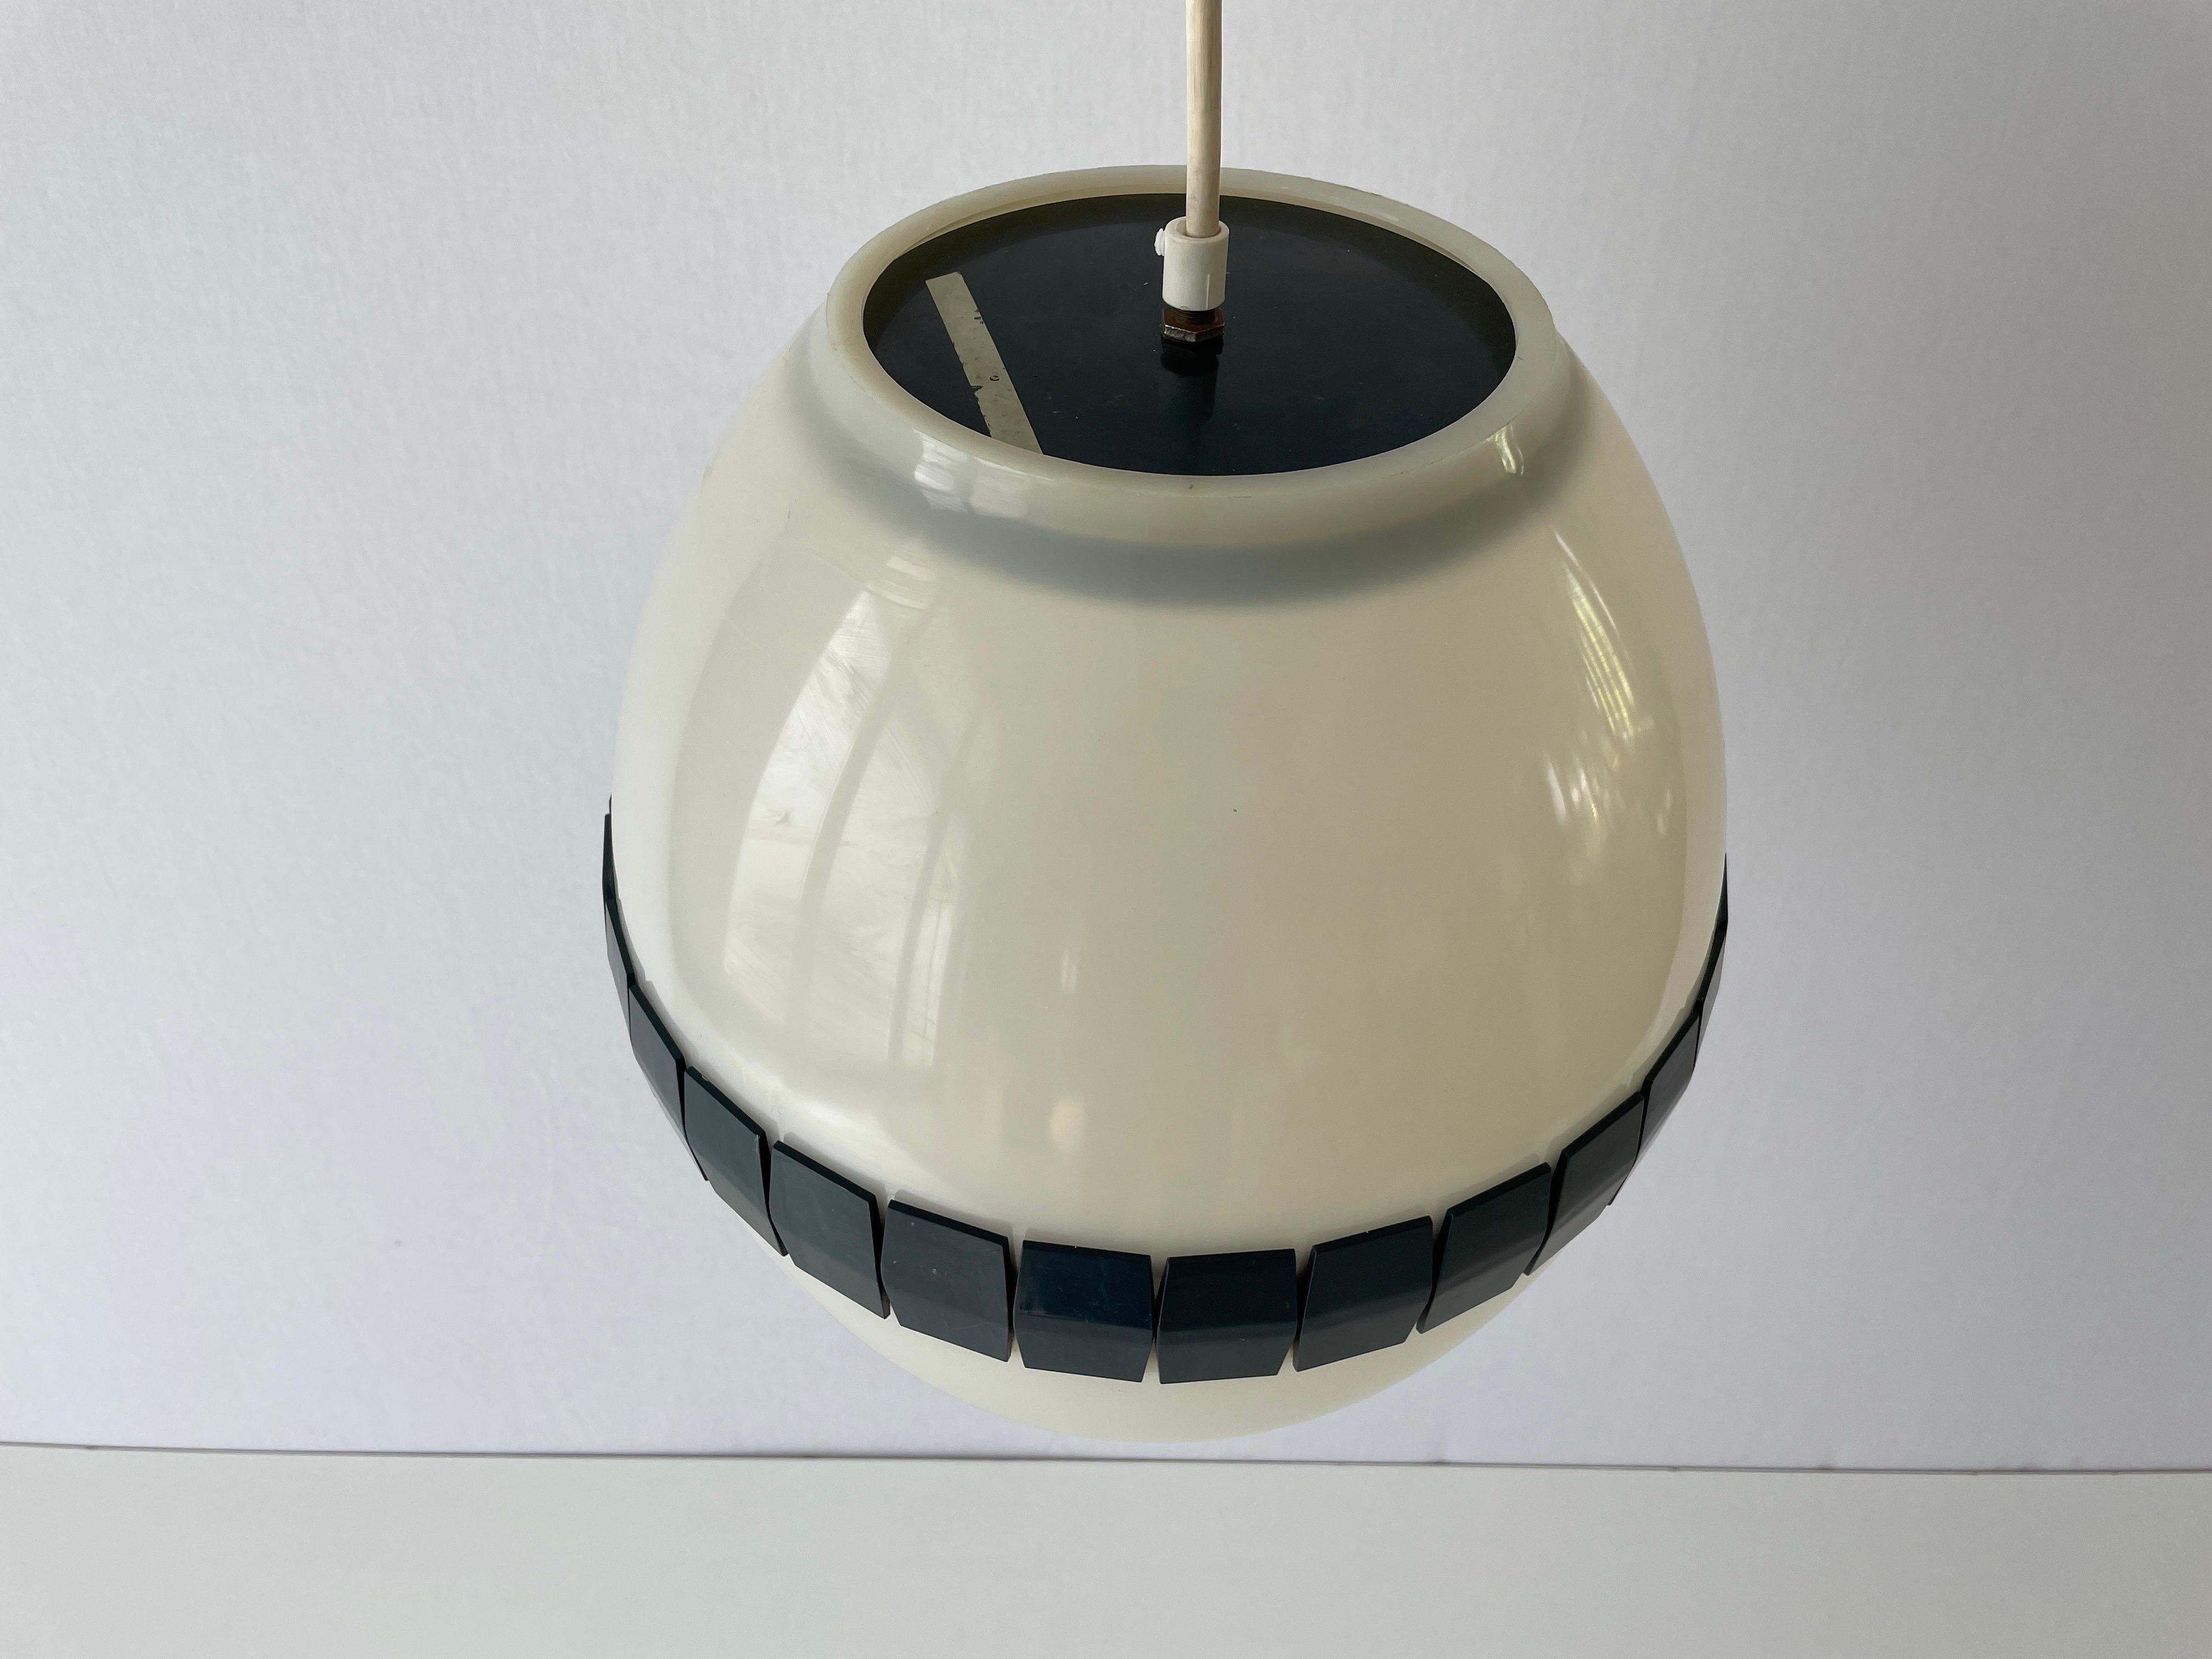 Lovely Italian Egg-shaped Plastic Ceiling Lamp, 1960s, Italy

This lamp works with E27 light bulb.
Wired and Suitable to use with 110V-220V in all countries.

Please do not hesitate to ask us for any type of questions

Measurements:
Height: 113